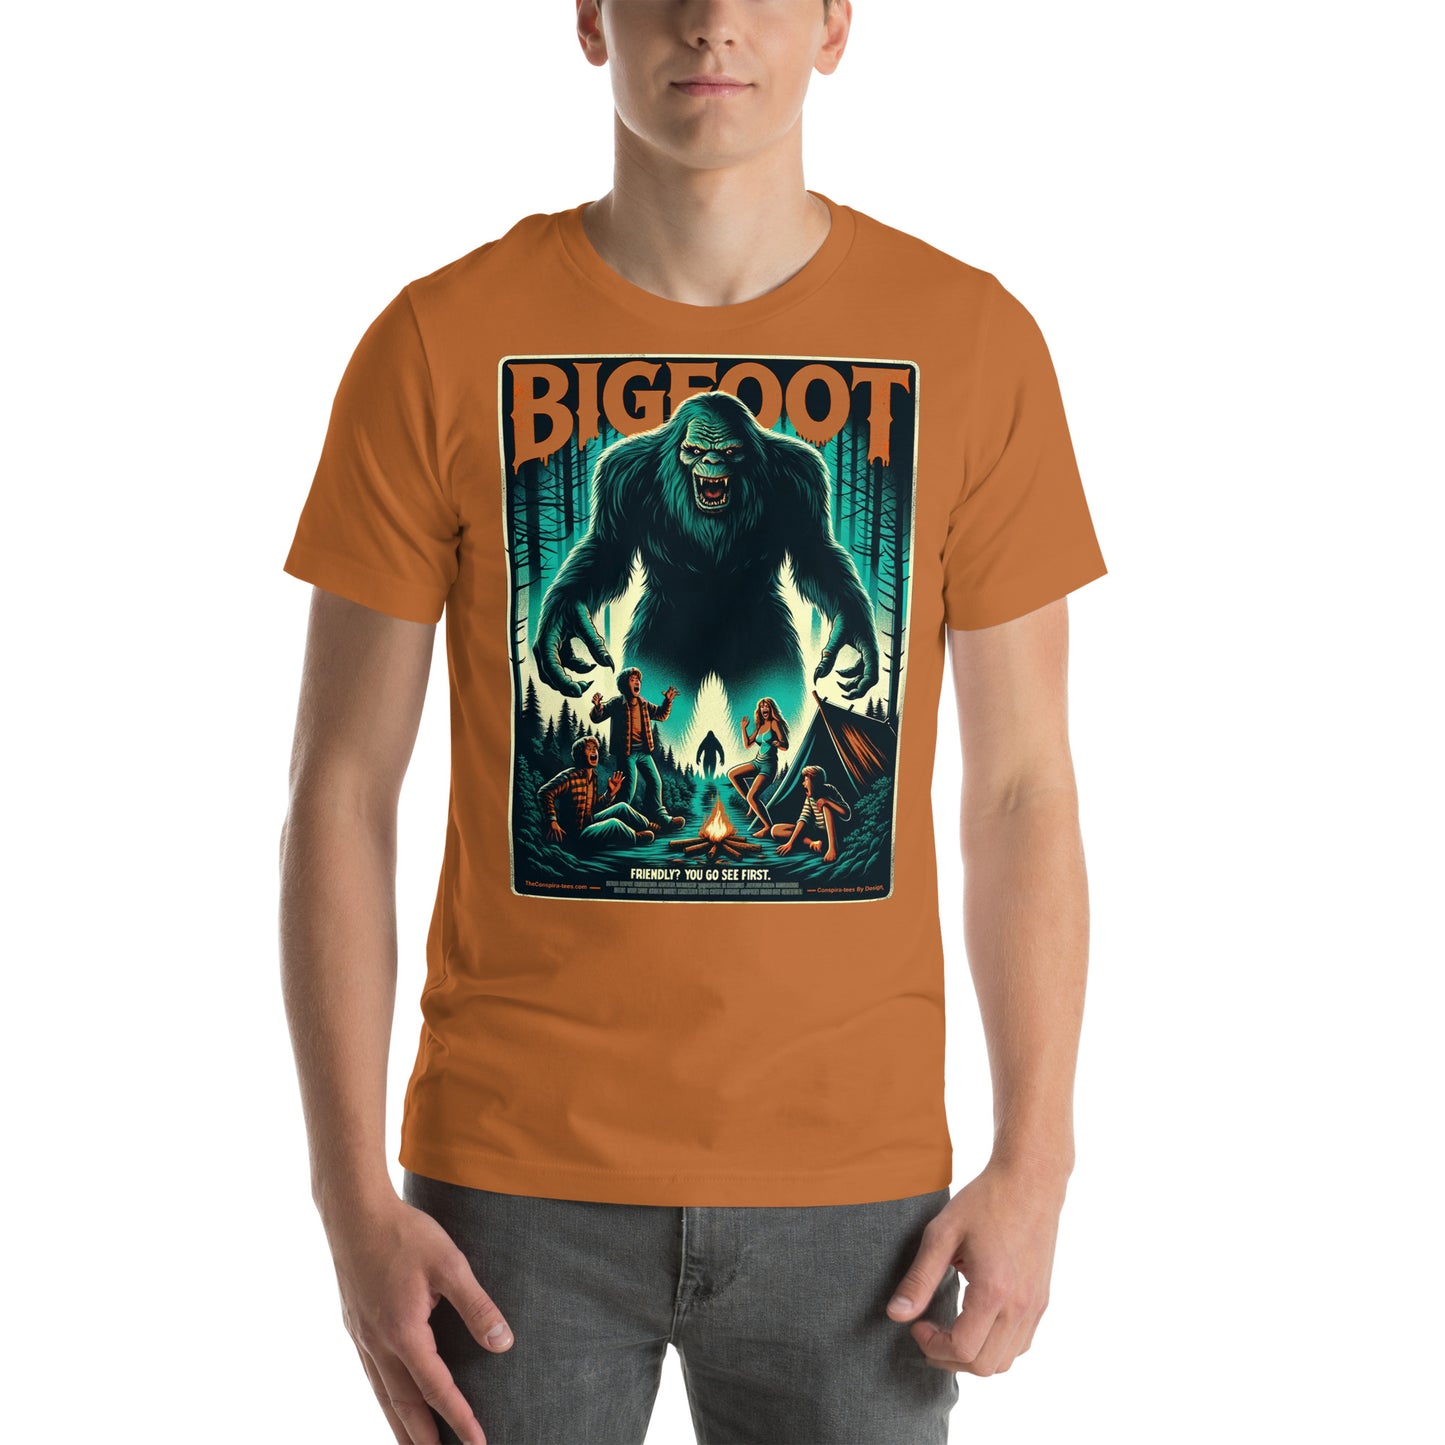 Bigfoot Friendly? You go see first Unisex t-shirt